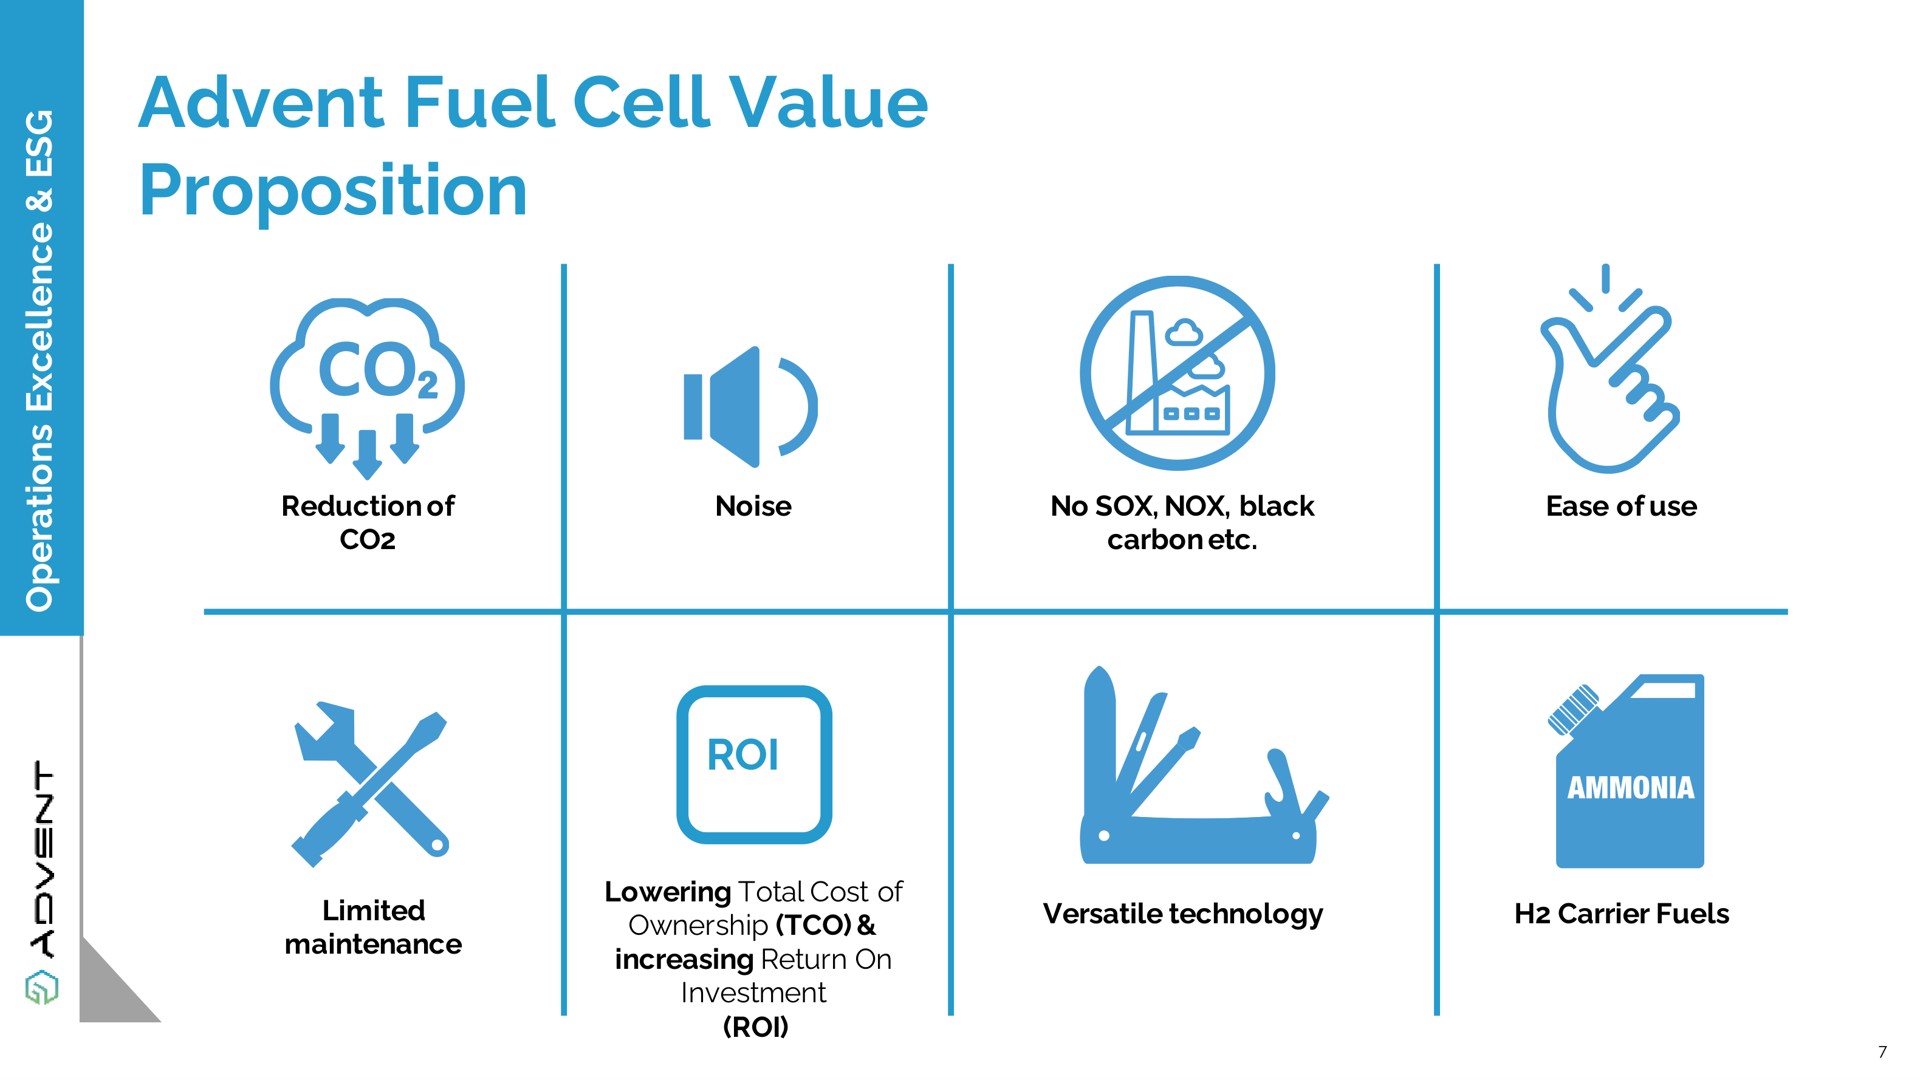 fuel cell value proposition | Advent